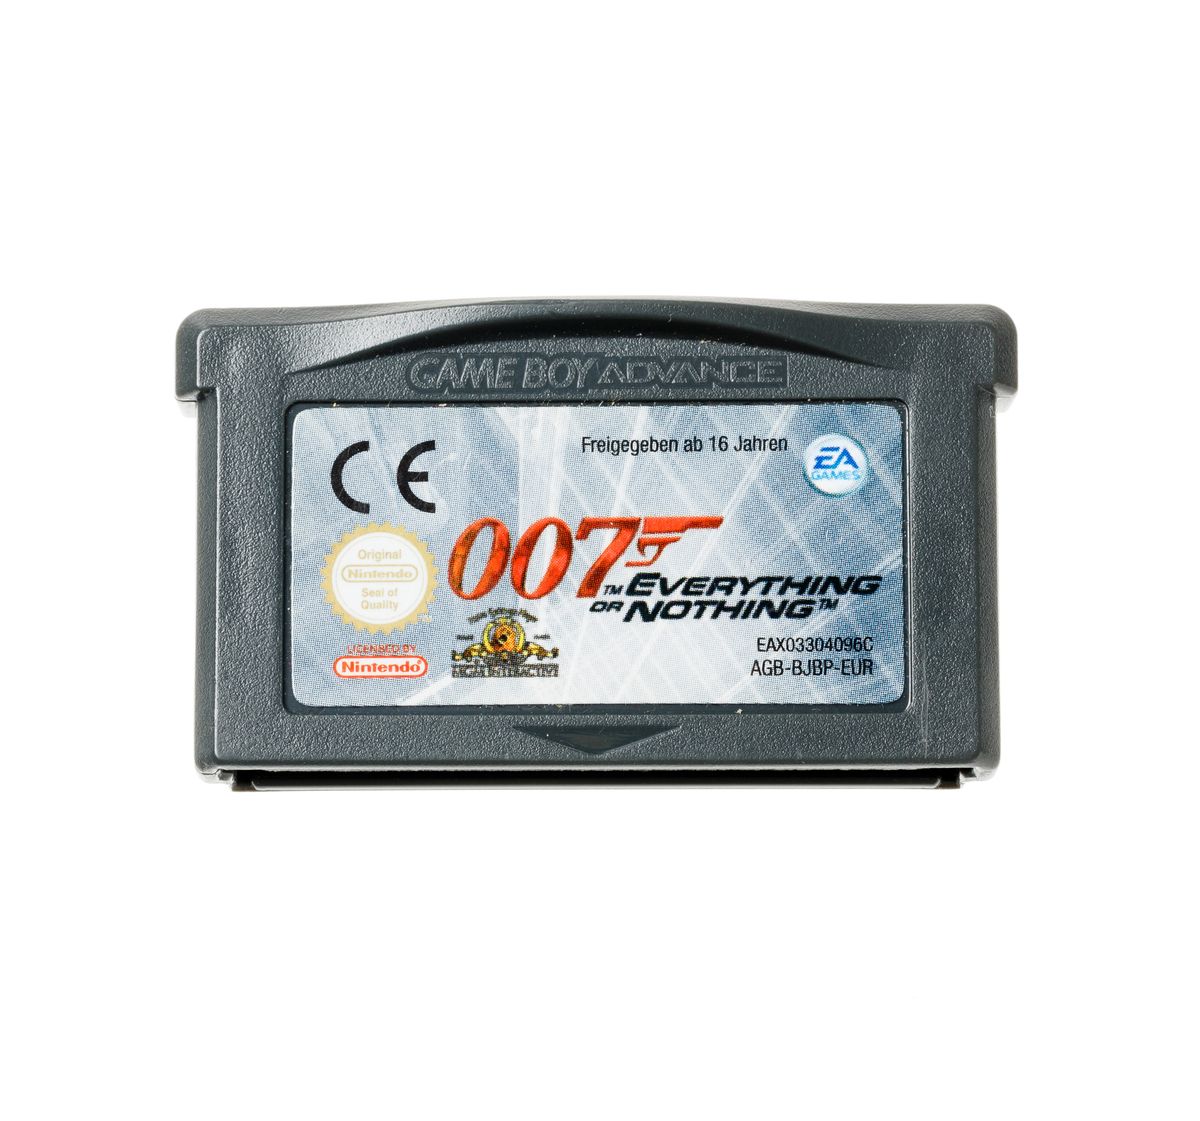 007 Everything or Nothing | Gameboy Advance Games | RetroNintendoKopen.nl